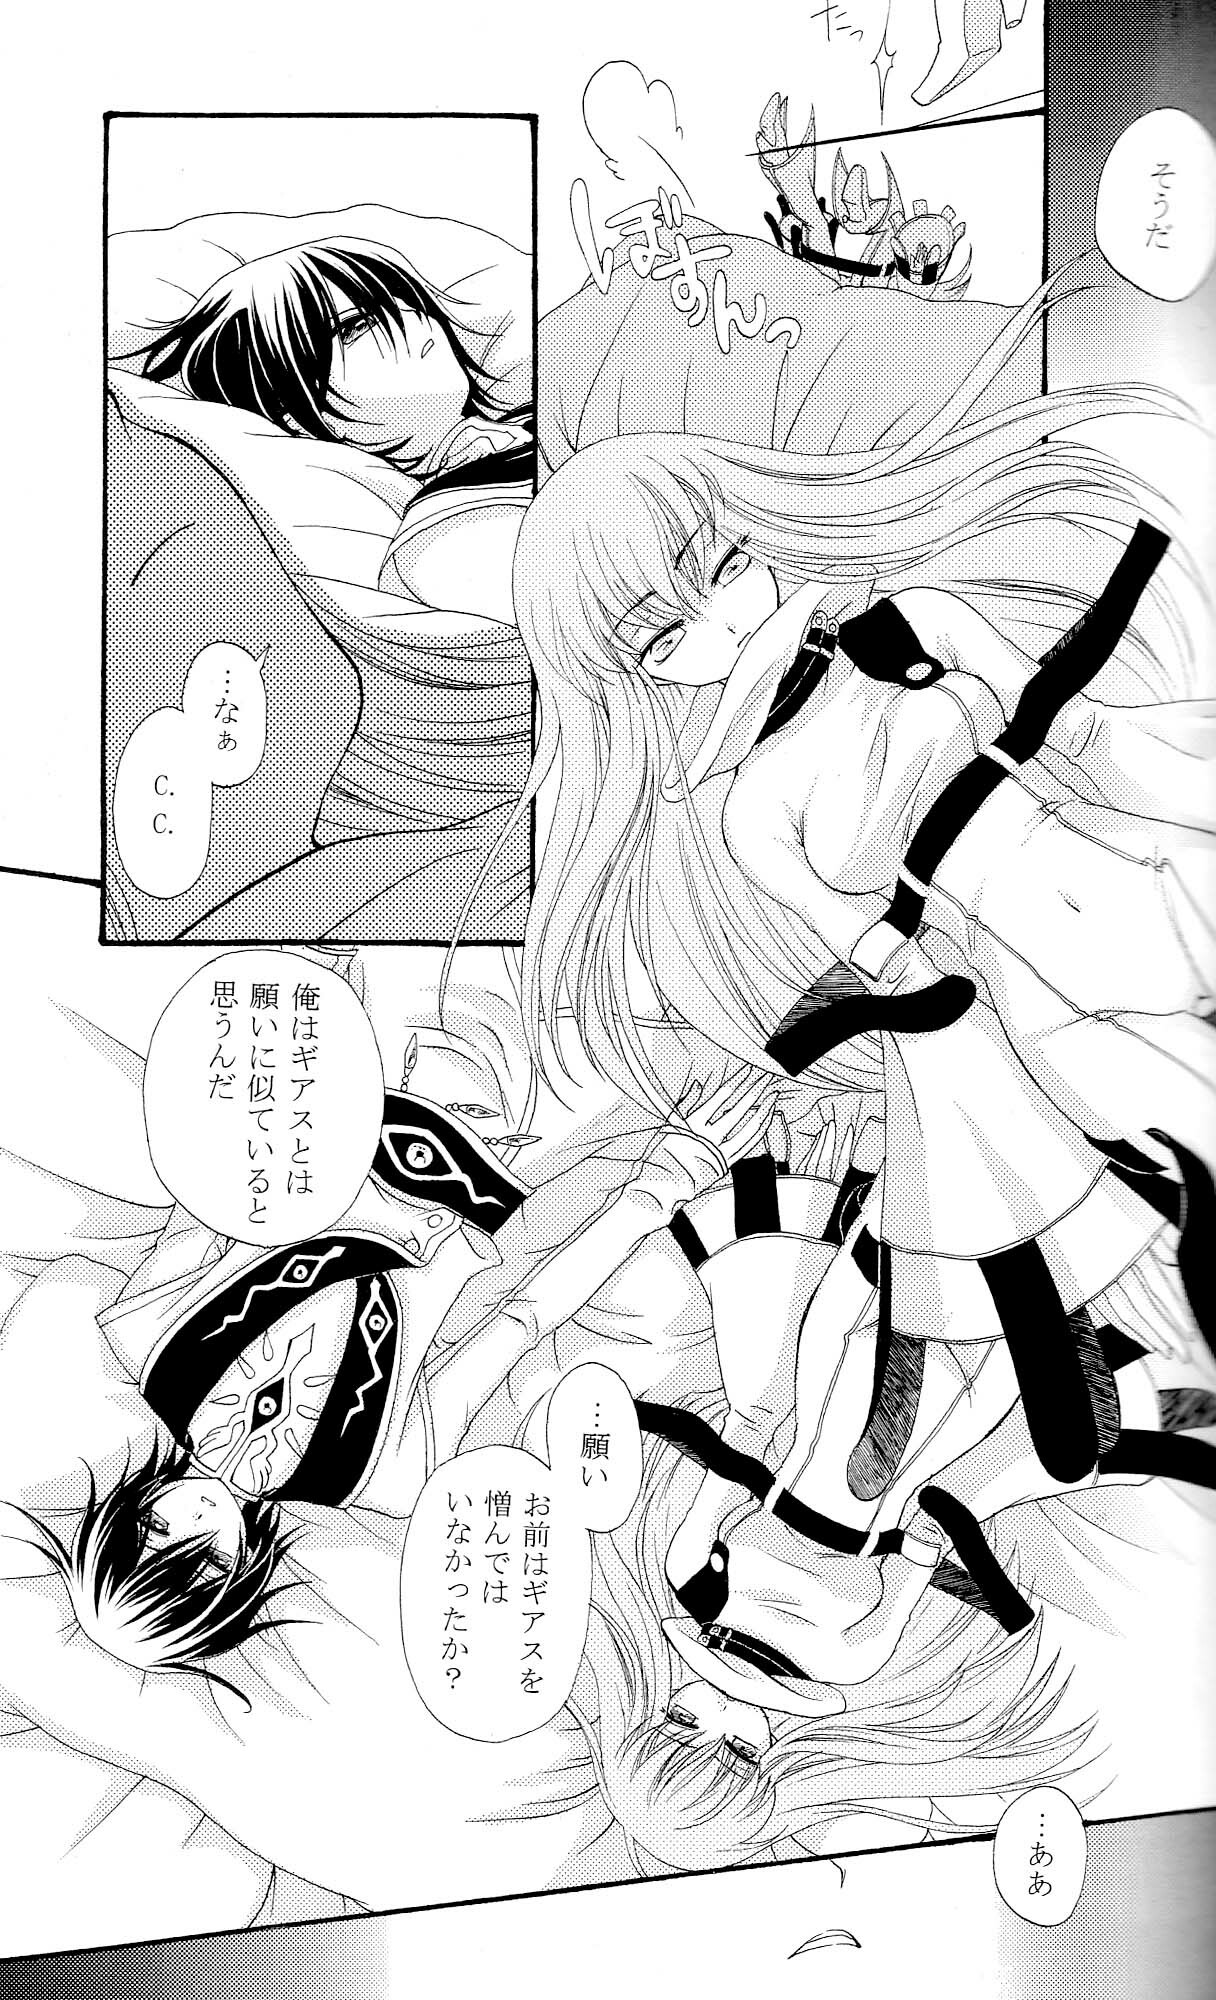 [APRICOT TEA] The last love letter presented to my dear only partner. (Code Geass) page 4 full